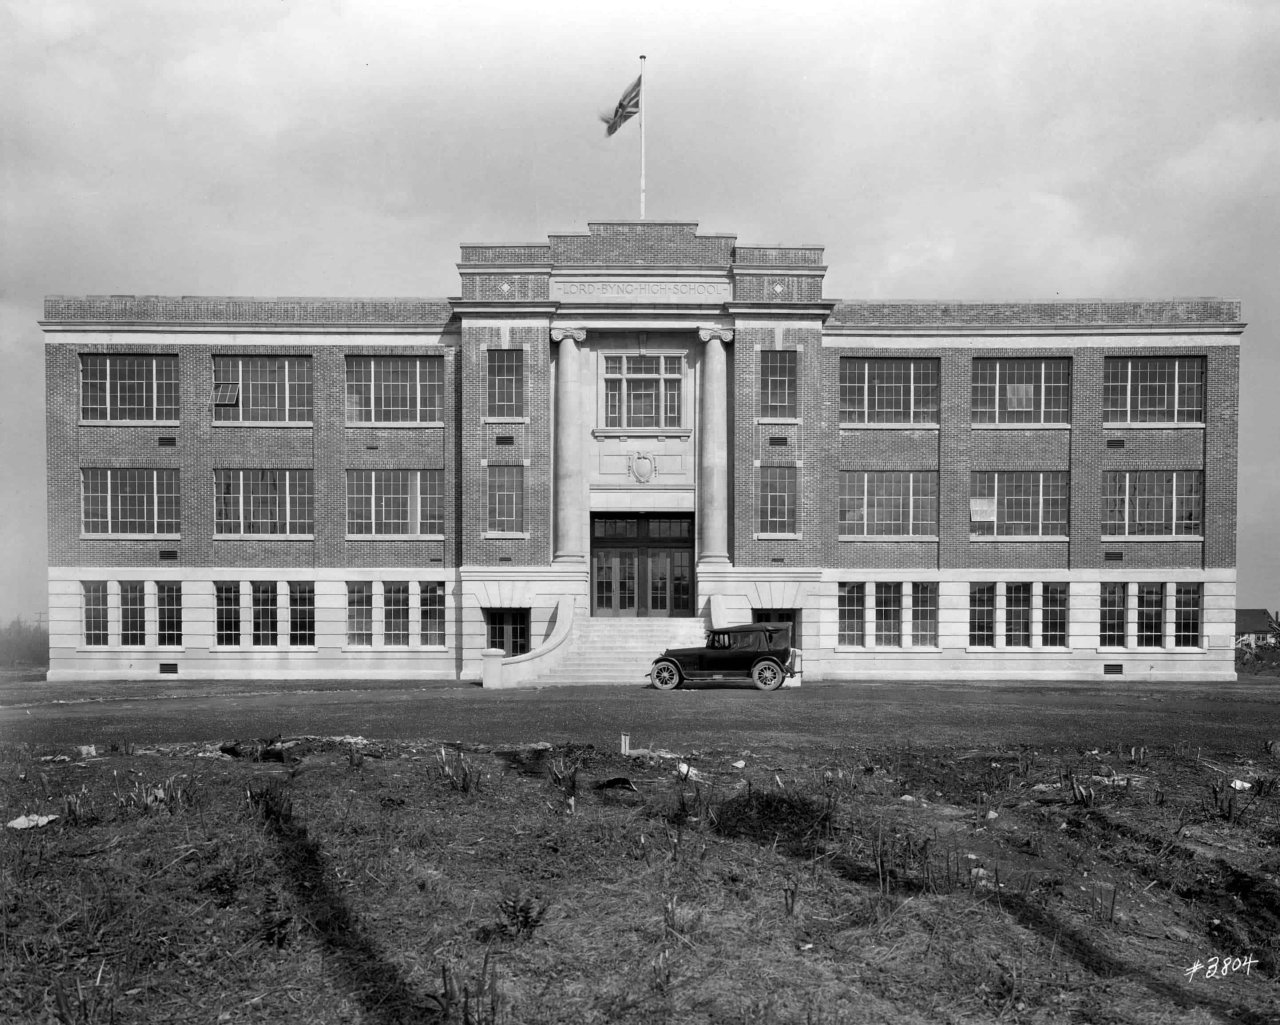 Lord Byng High School c. 1925. Source: City of Vancouver Archives Sch N56